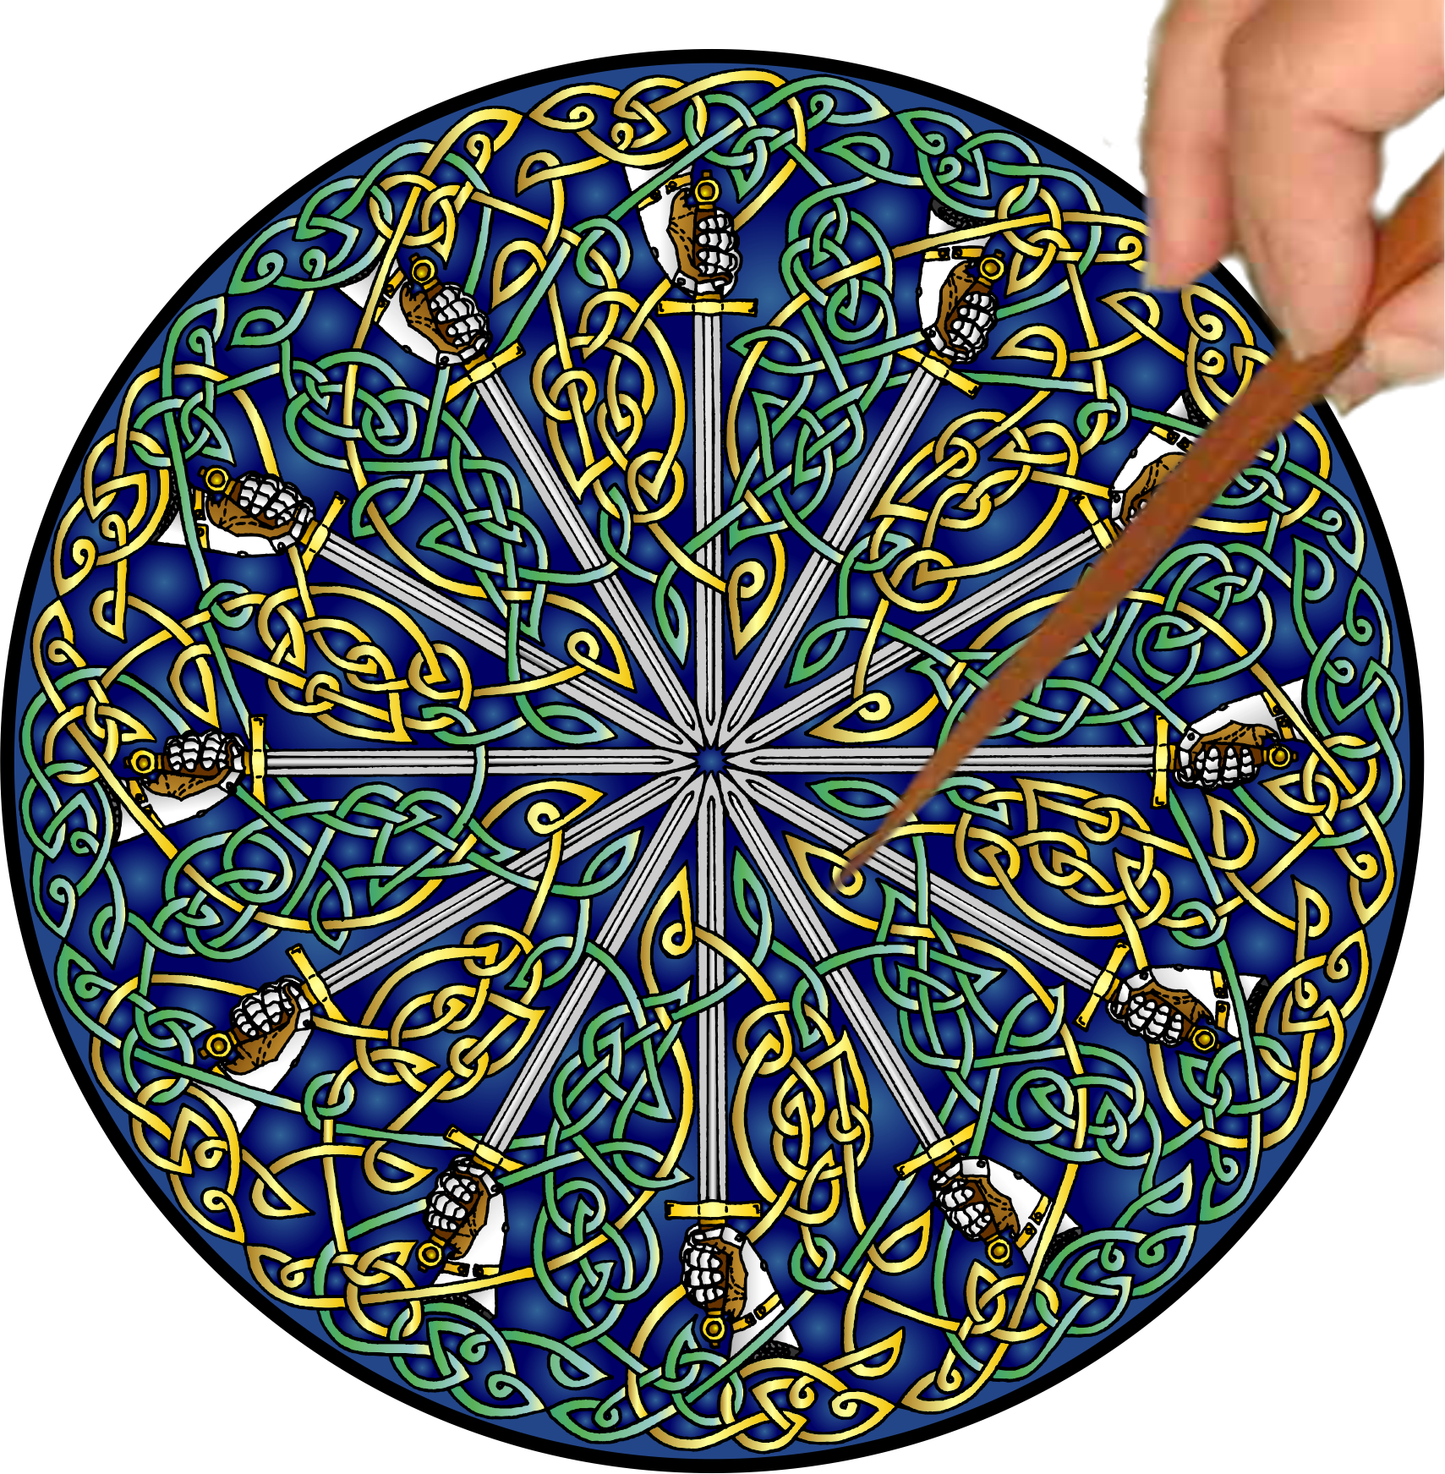 Celtic Swords Mandalynth - Mindful Tracing Art for Stress, Anxiety and Attention Management